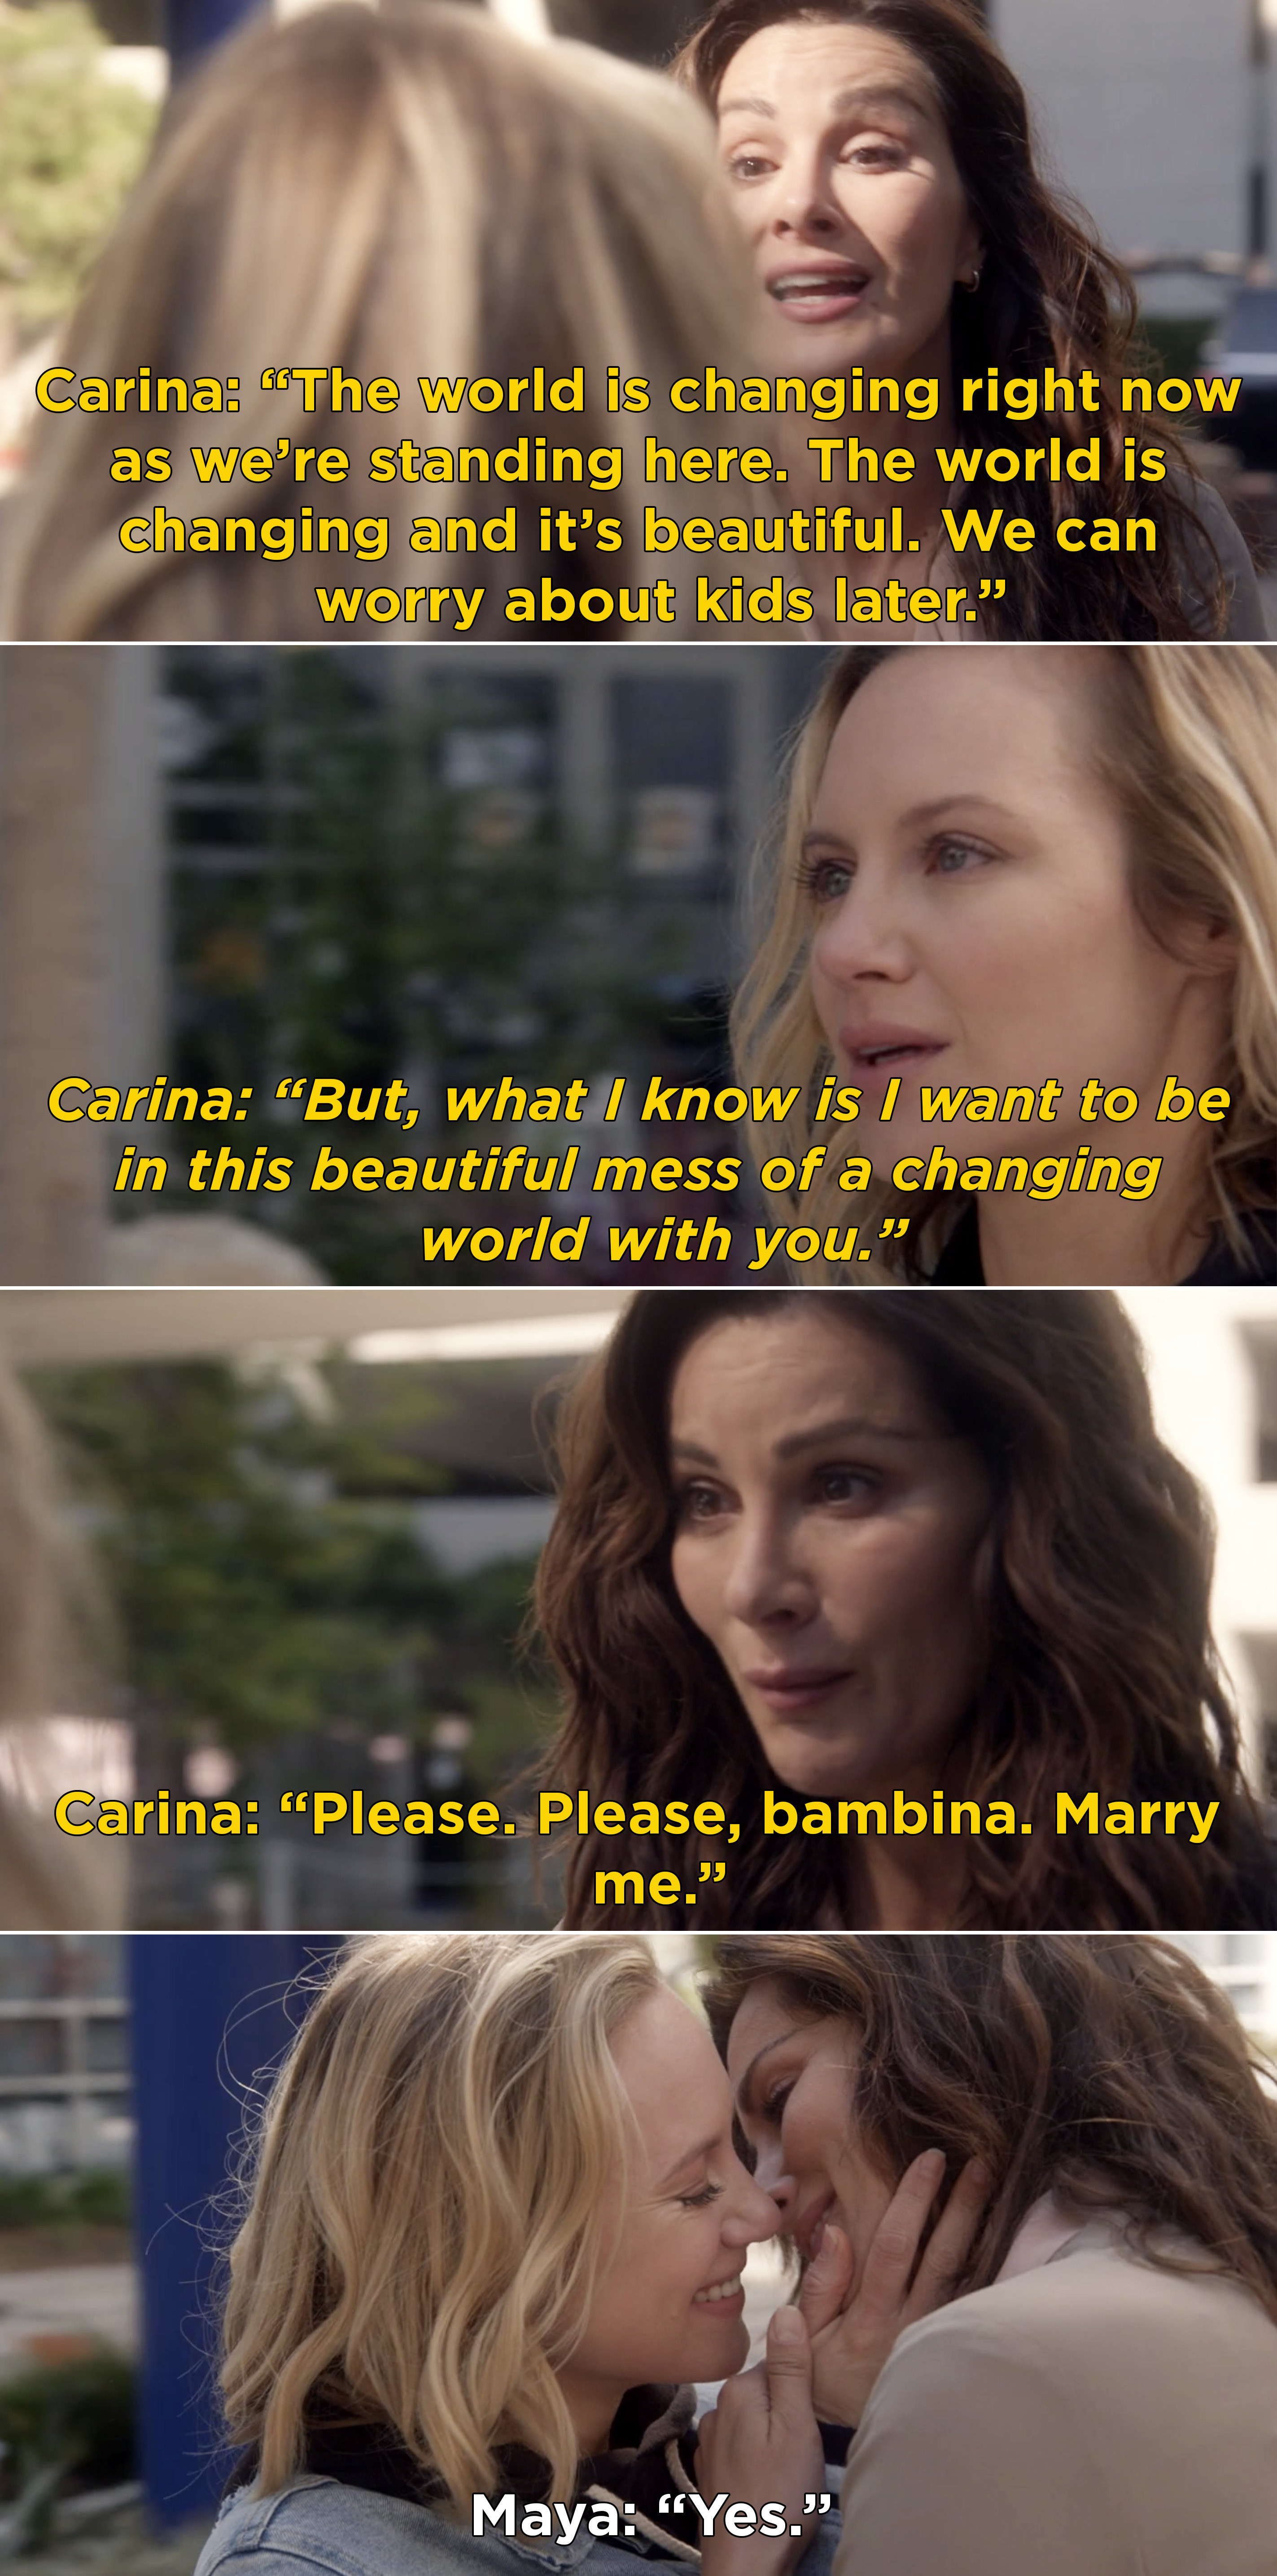 Carina telling Maya she wants to be in this &quot;beautiful mess of a changing world&quot; with her